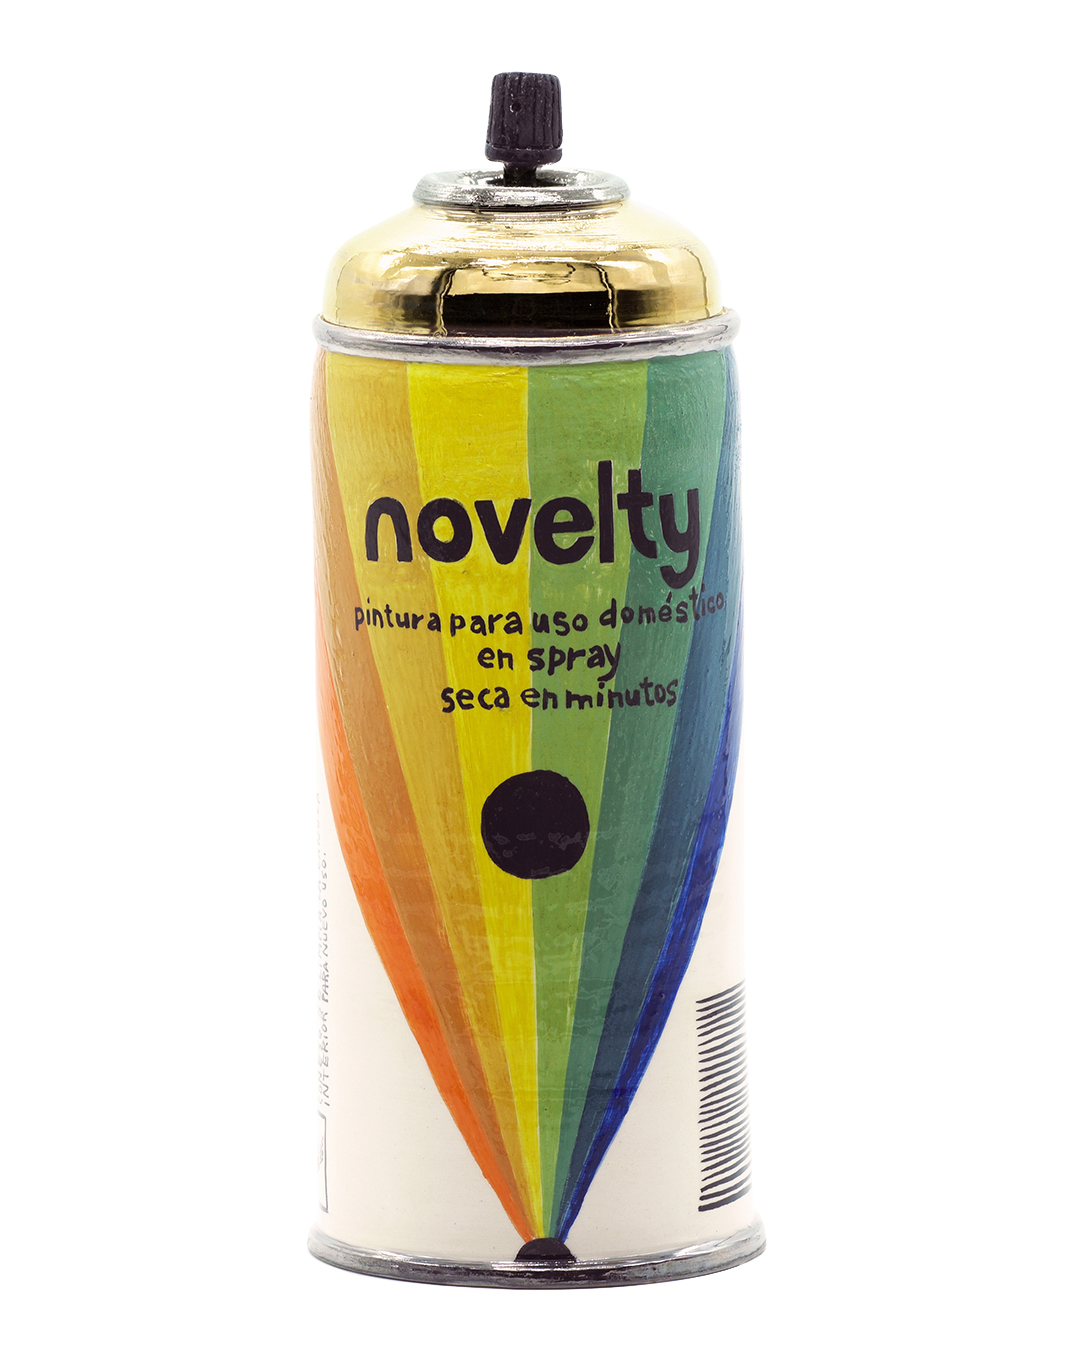 Ceramic Novelty Black Spray Can Luxe Edition